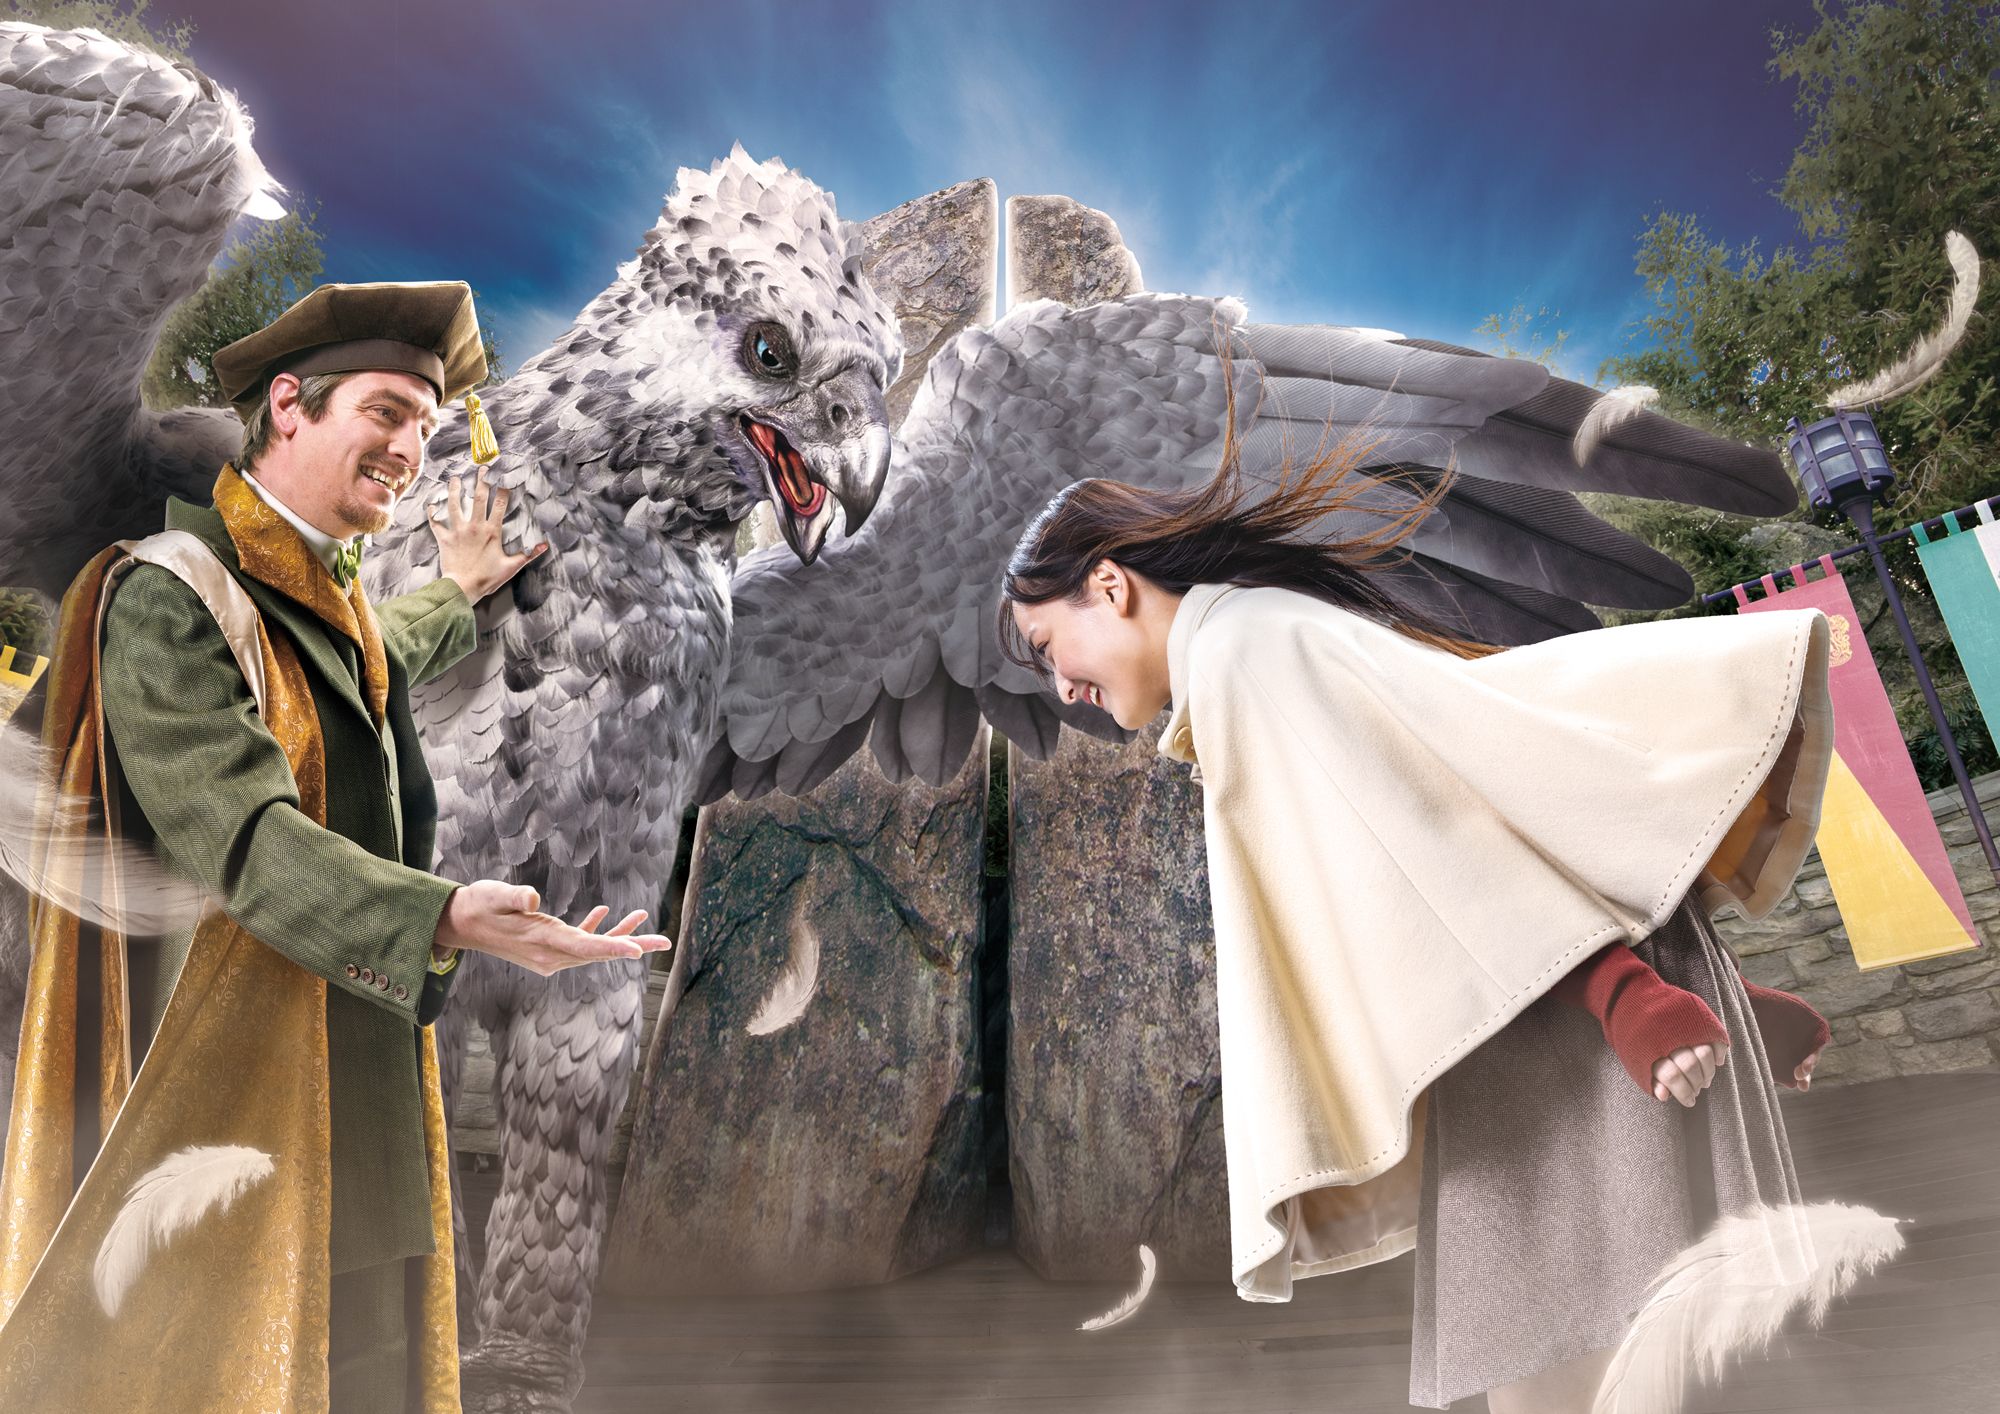 'Hippogriff Magical Lesson' USJ 'Harry Potter Area' new magical experience [Magical Creatures Encounter - Encounter with Magical Creatures] 17 Mar 2023 (Fri) - limited time event!